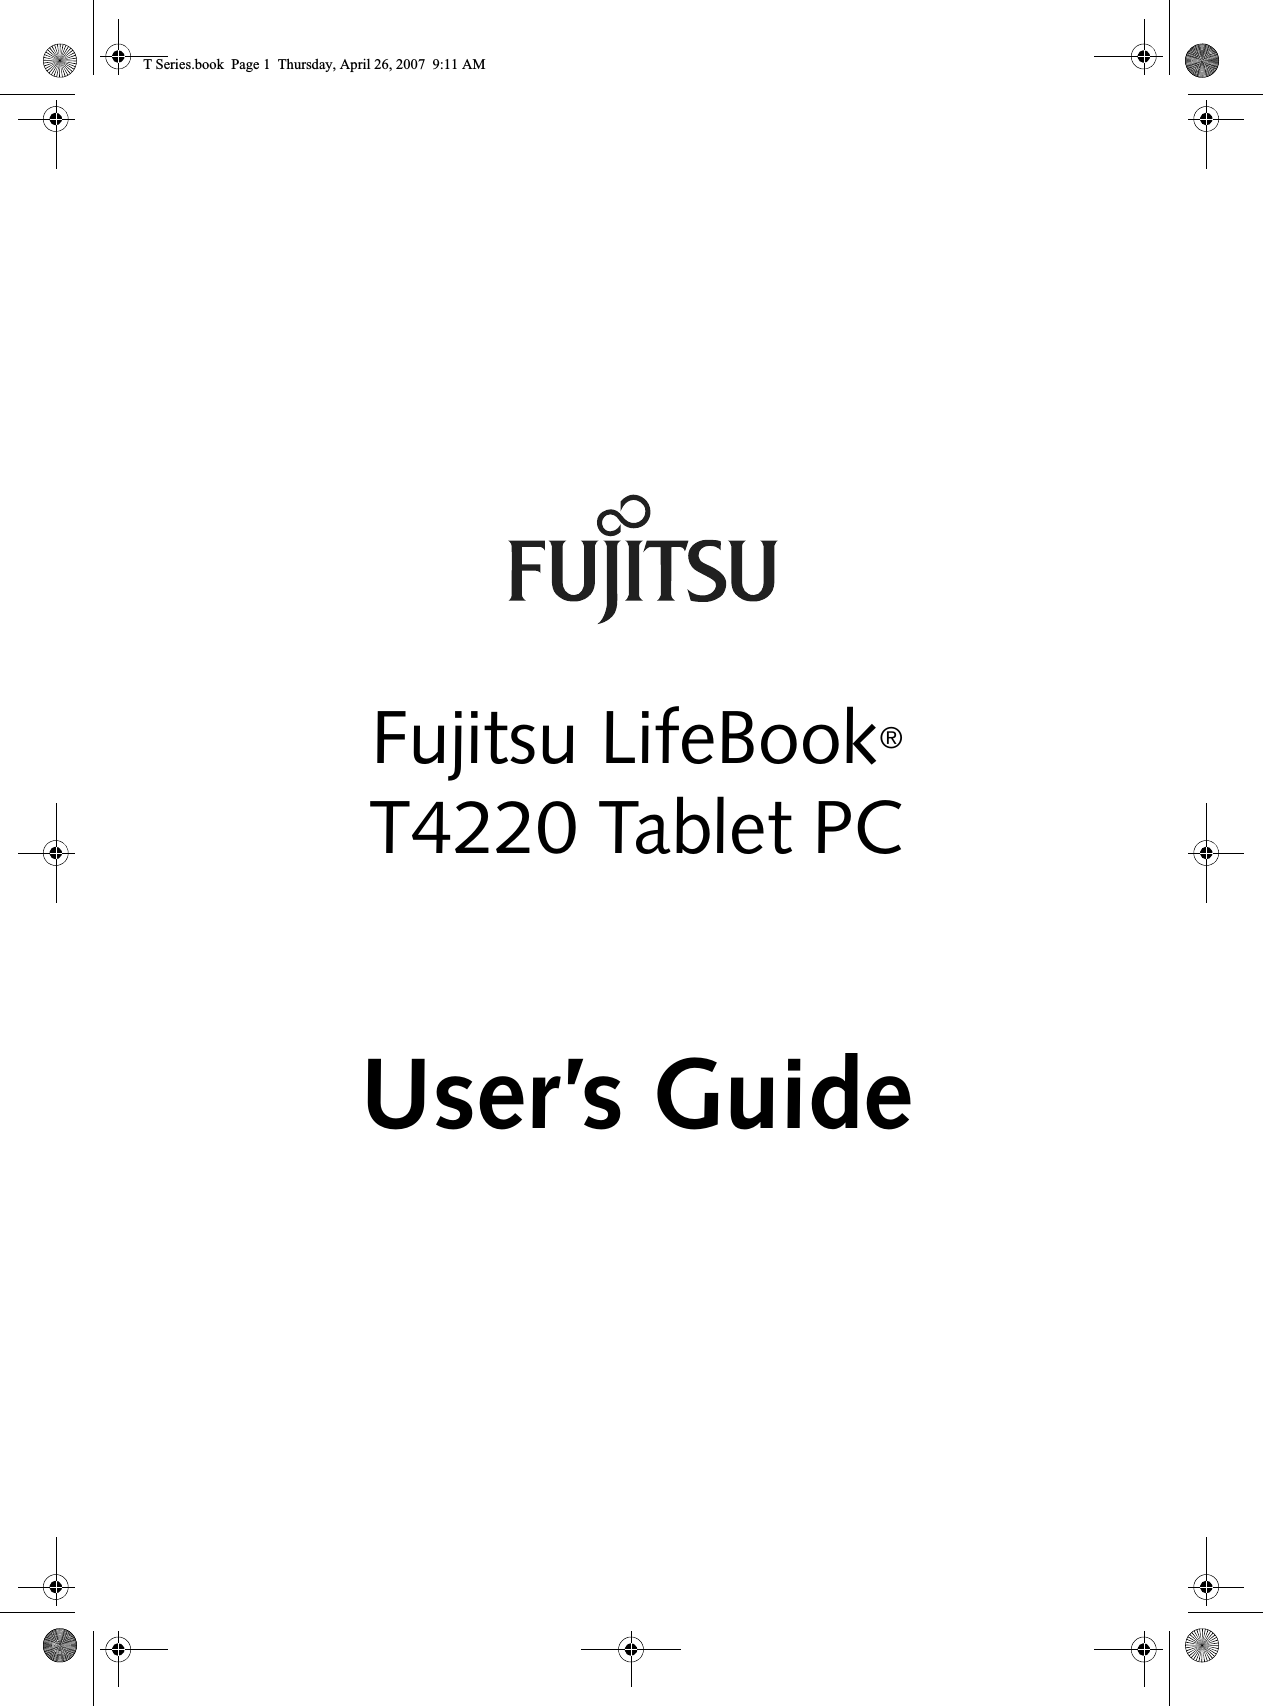 Fujitsu LifeBook®T4220 Tablet PCUser’s GuideT Series.book  Page 1  Thursday, April 26, 2007  9:11 AM